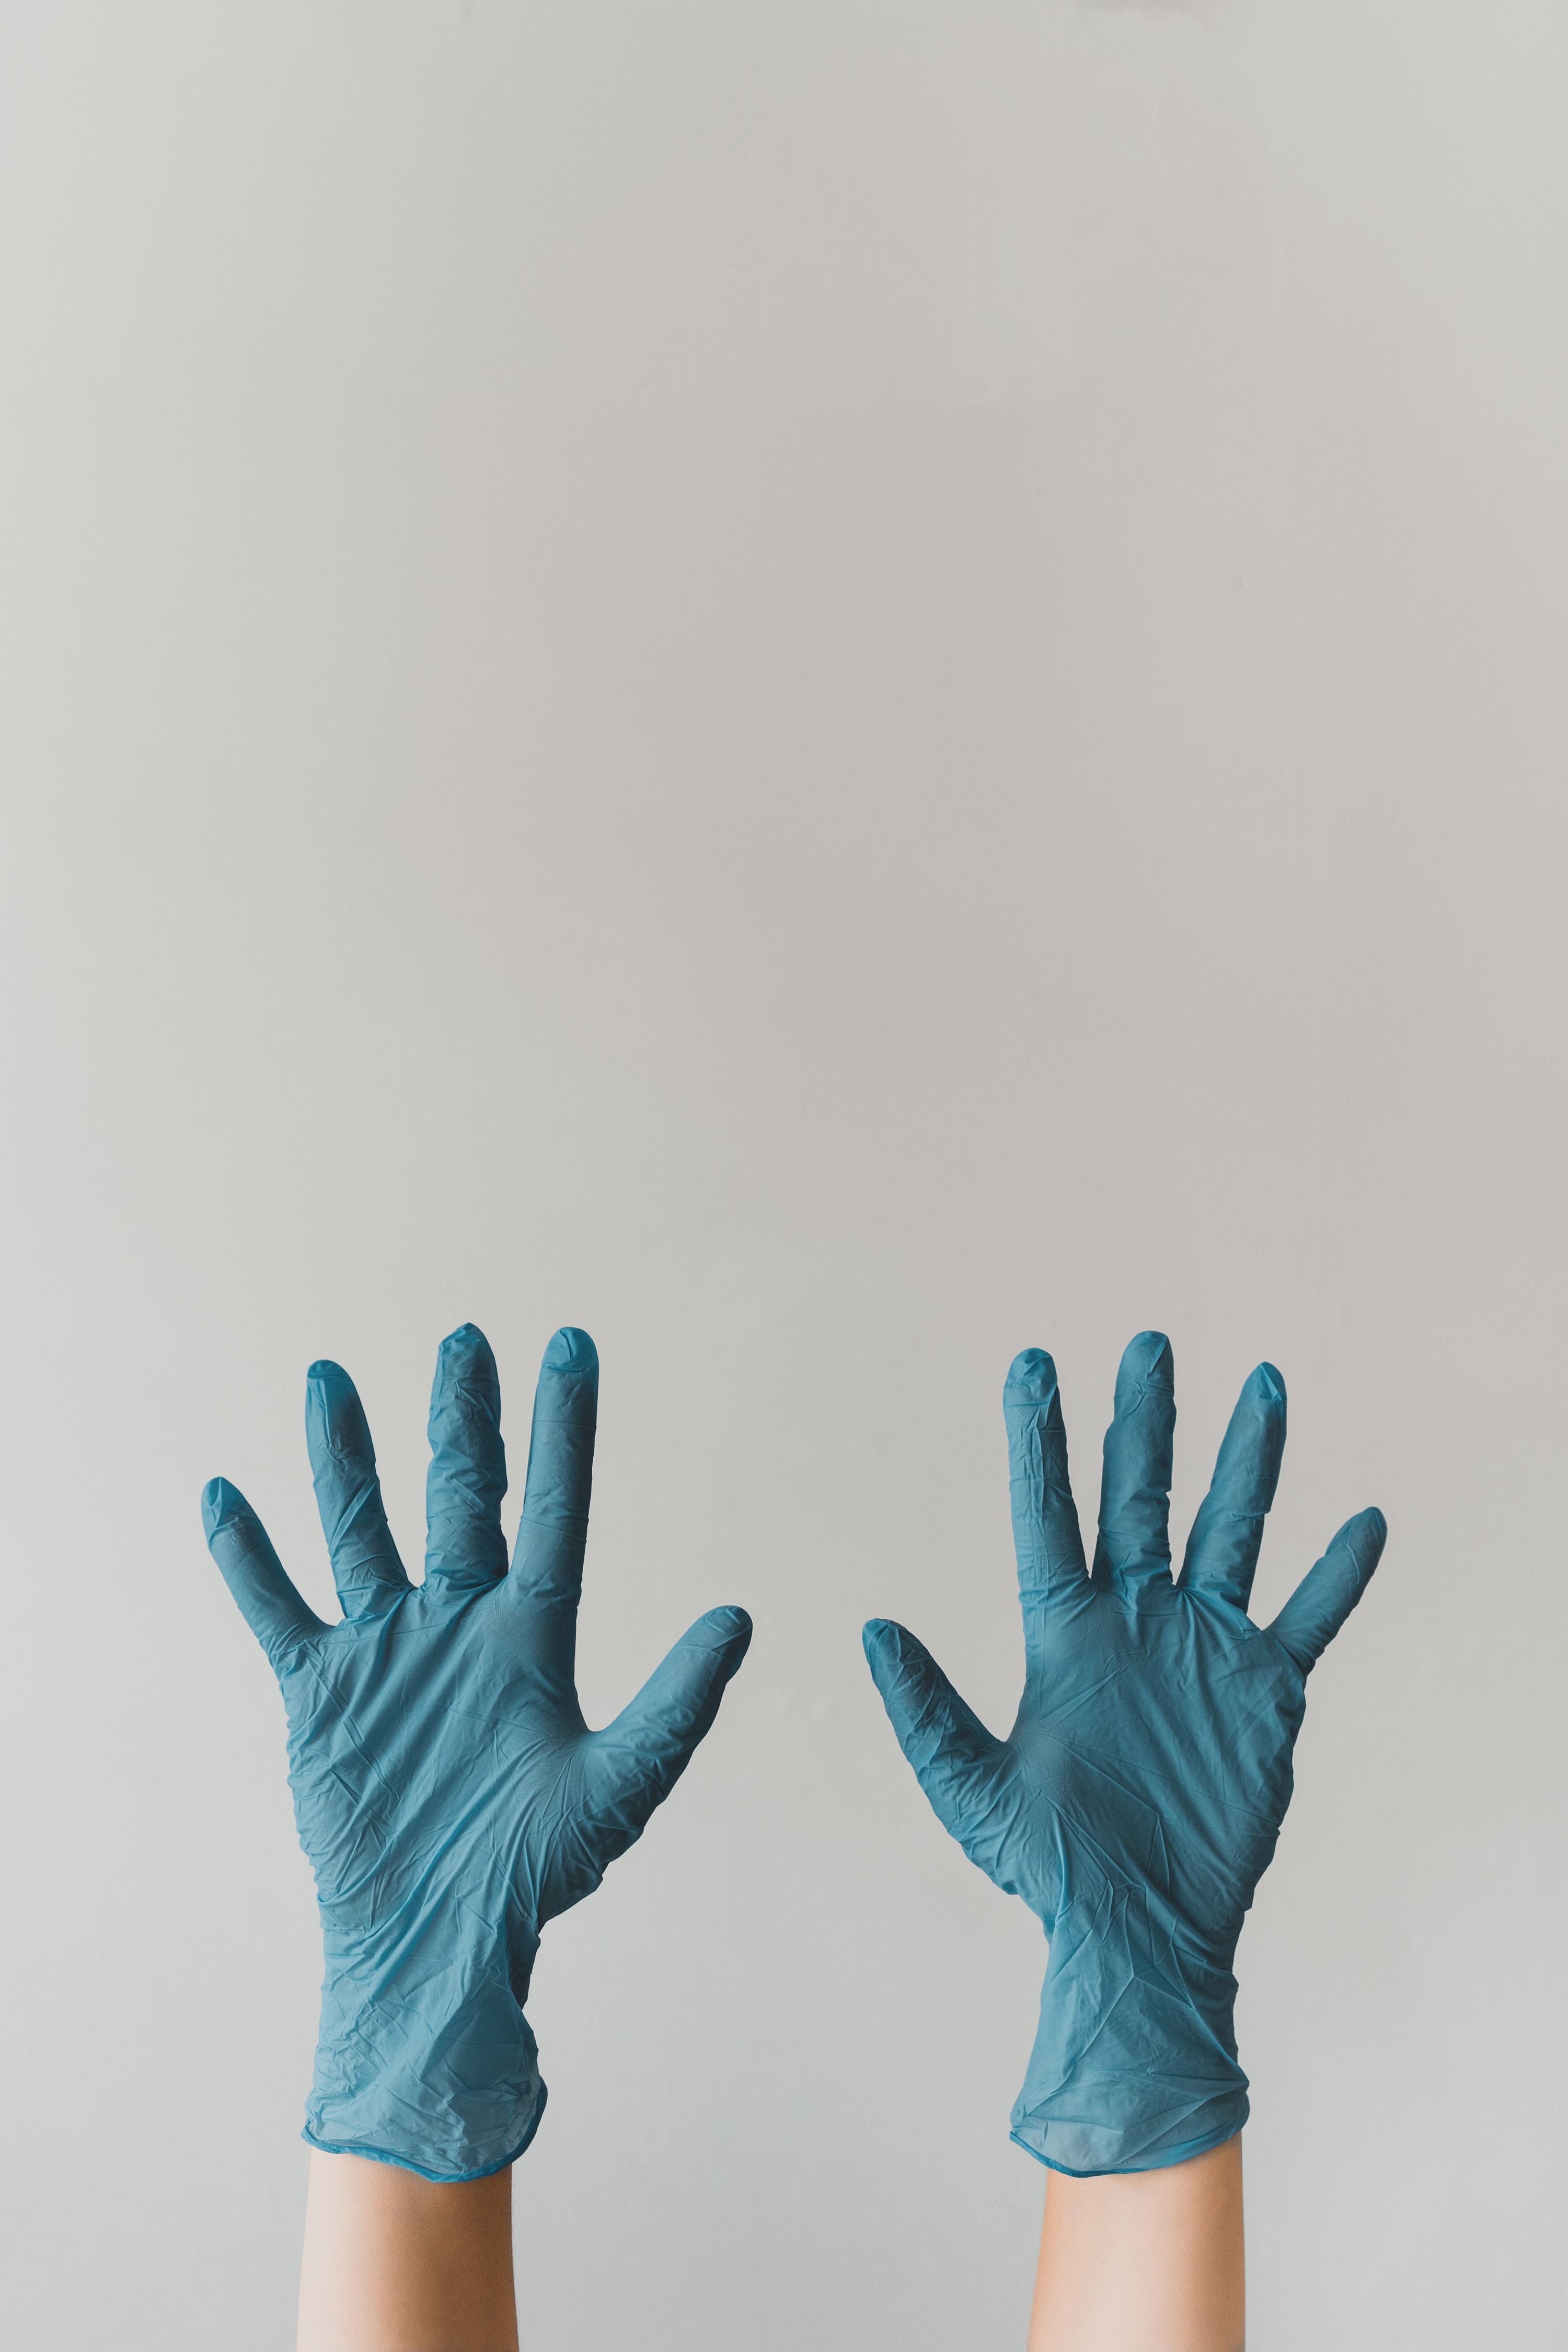 Two hands wearing blue latex gloves before liver ultrasound